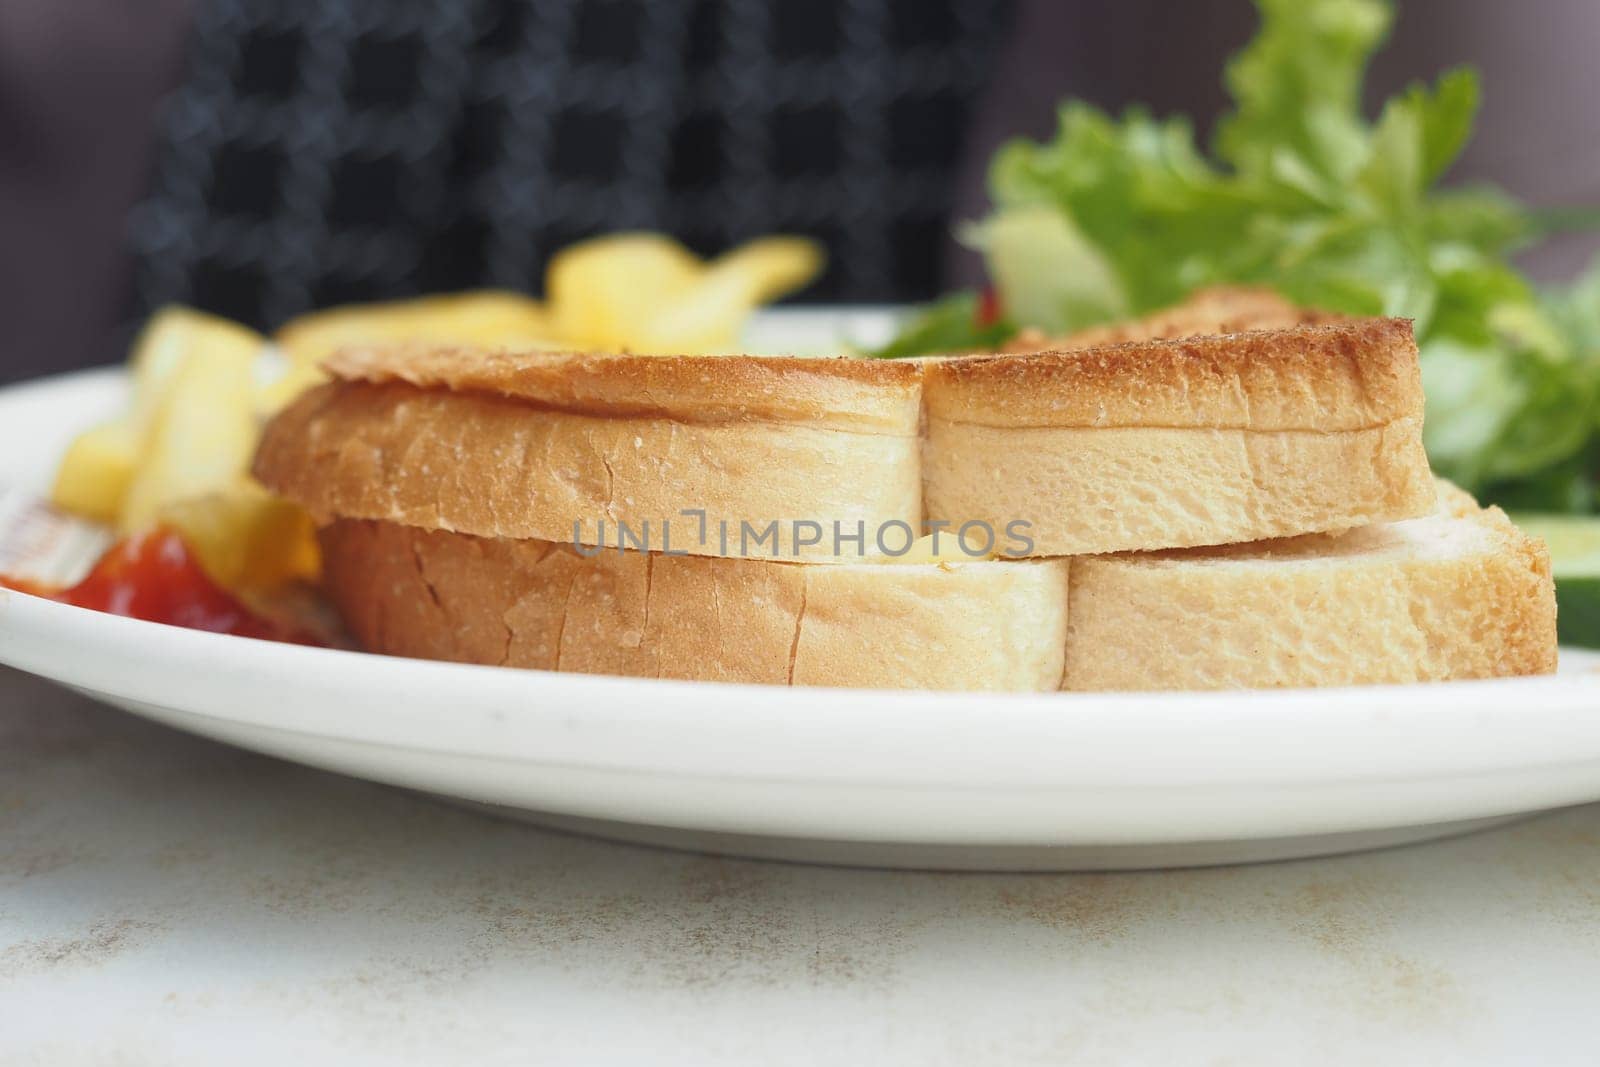 sandwich or toast with toasted bread slices, by towfiq007